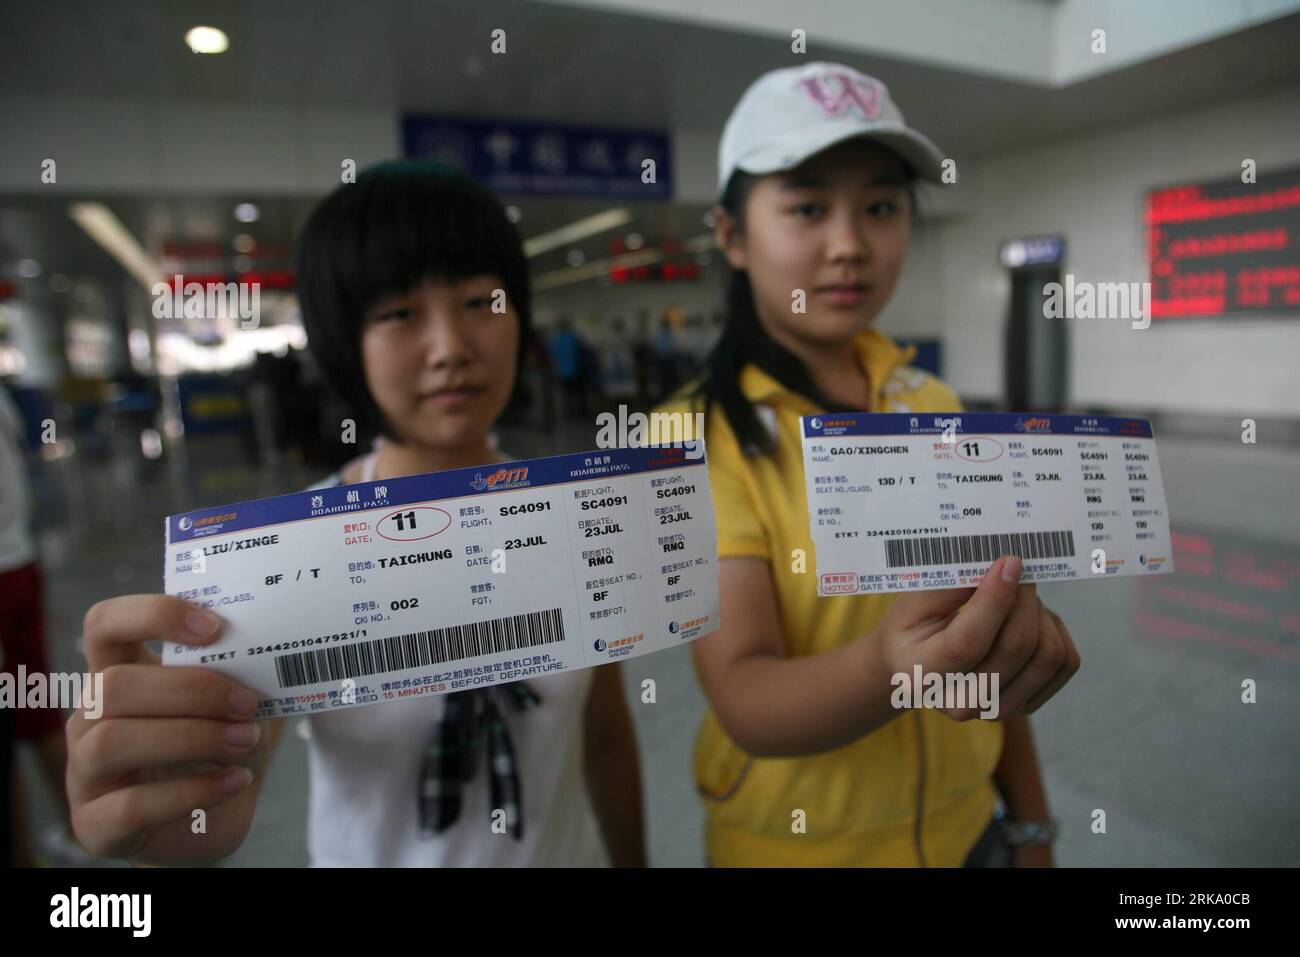 Bildnummer: 54248979  Datum: 23.07.2010  Copyright: imago/Xinhua (100723) -- JINAN, July 23, 2010 (Xinhua) -- Passengers present their boarding passes at the airport in Jinan, capital of east China s Shandong Province, July 23, 2010. Shandong Airlines launched direct flights from Jinan to Taichung Friday, which is the sixth route between east China s Shandong Province and southeast China s Taiwan. The first flight reached Ching Chuan Kang Airport in Taichung at 10 o clock am. (Xinhua/Lu Chuanquan)(xzj) (4)CHINA-SHANGDONG-JINAN-TAIWAN-TAICHUNG-DIRECT FLIGHT(CN) PUBLICATIONxNOTxINxCHN Gesellscha Stock Photo